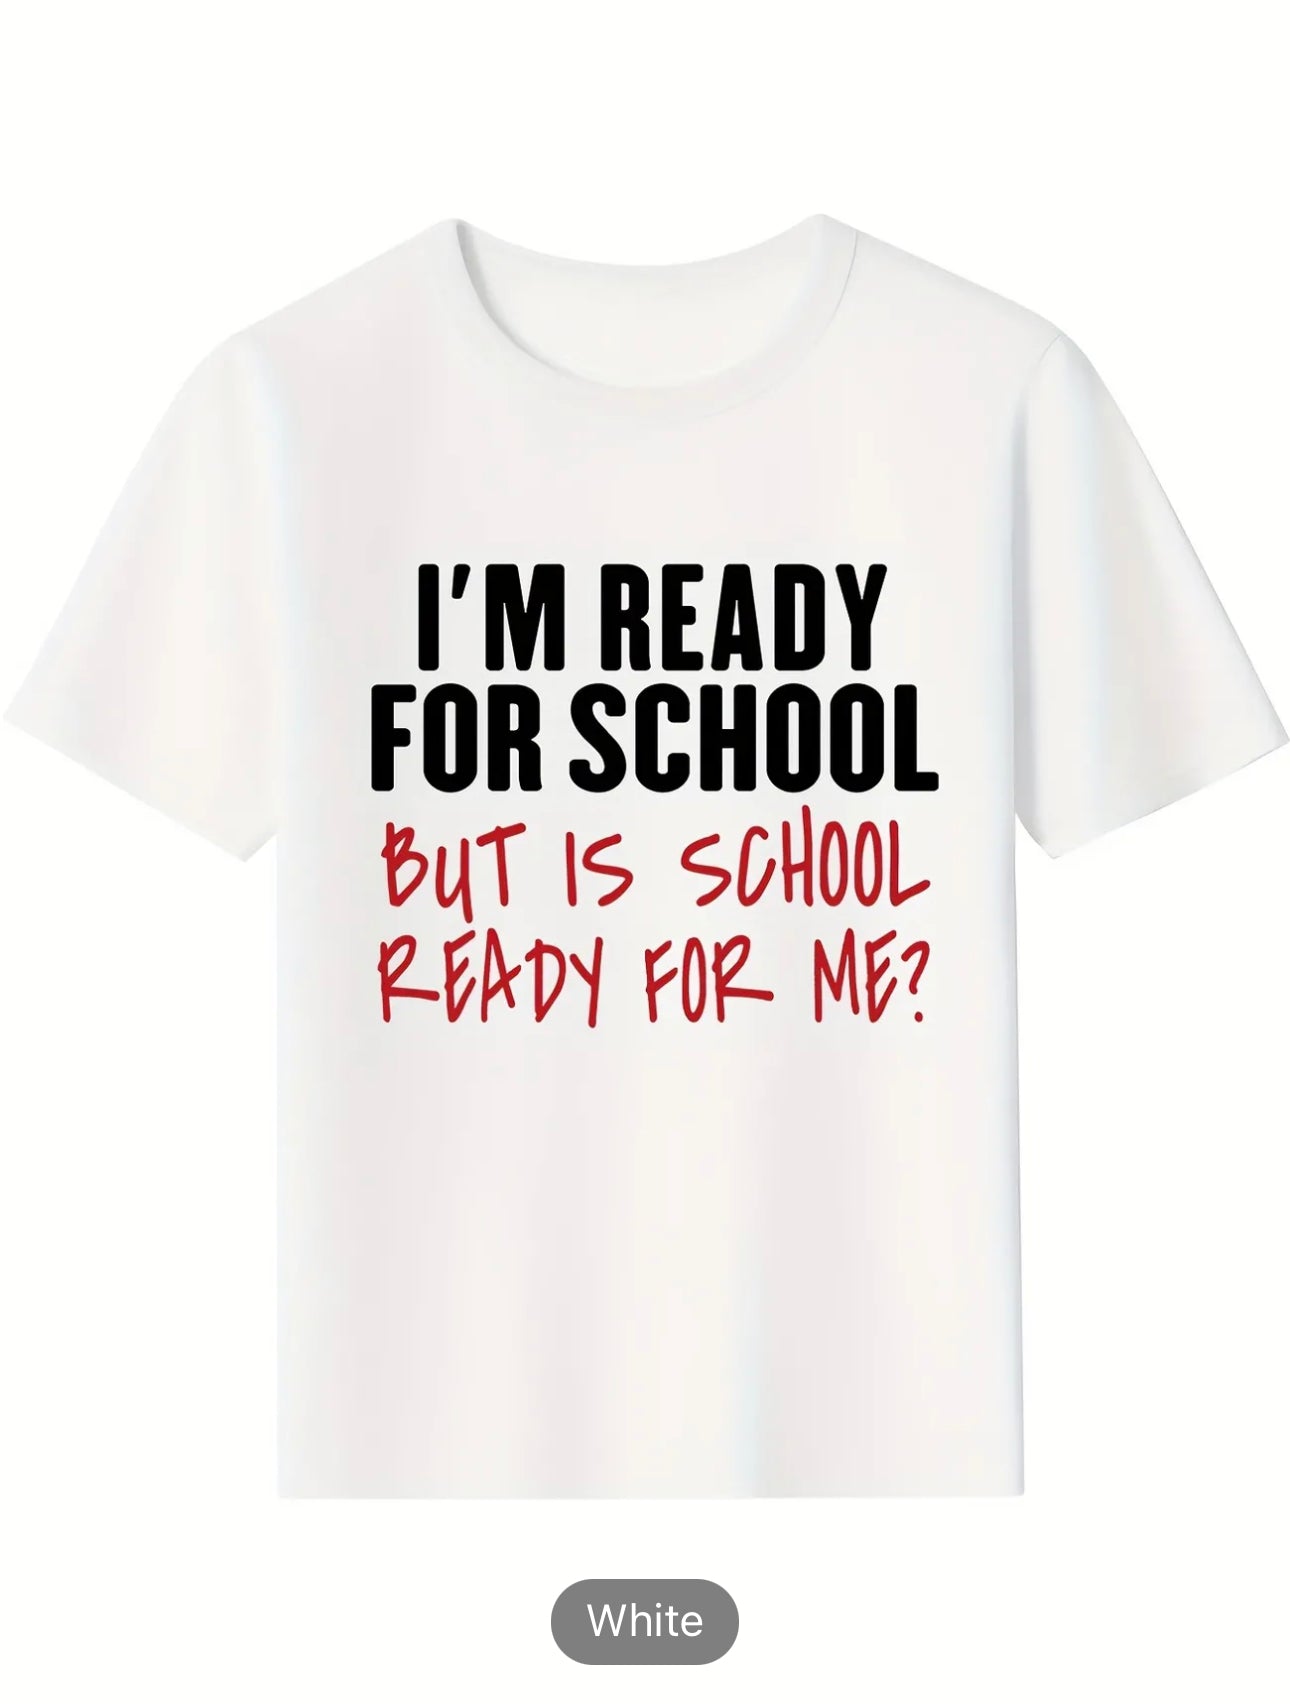 READY FOR SCHOOL BUT IS SCHOOL READY FORME Letter Print Boys Creative Cotton T-shirt, Casual Lightweight Comfy Short Sleeve Crew Neck Tee Tops, Kids Clothings For Summer